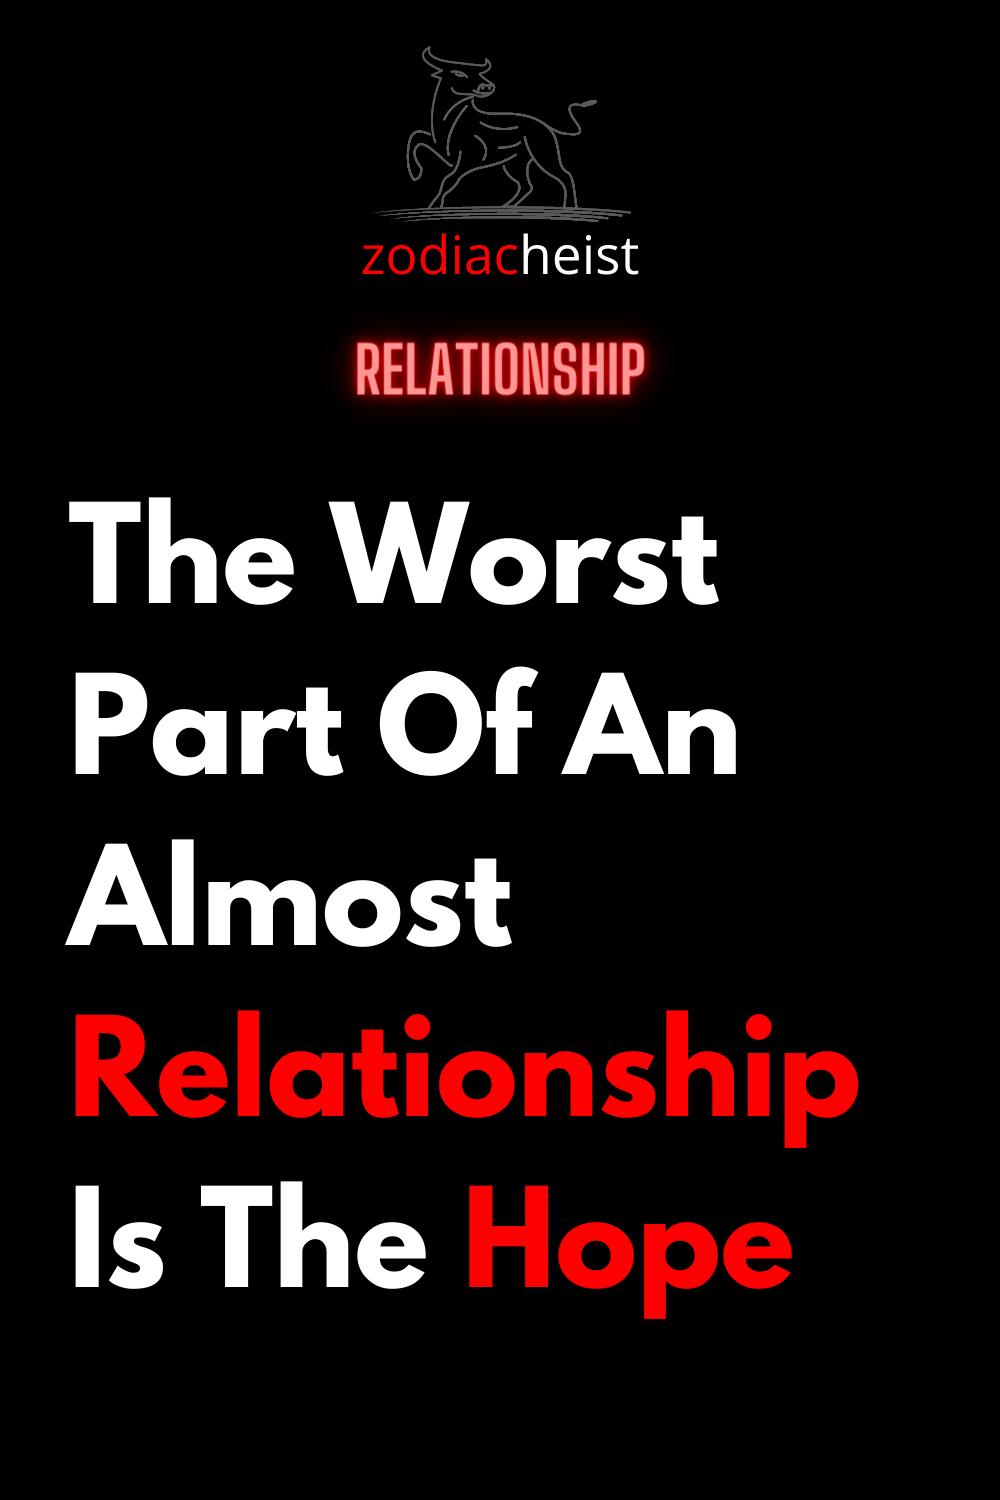 The Worst Part Of An Almost Relationship Is The Hope